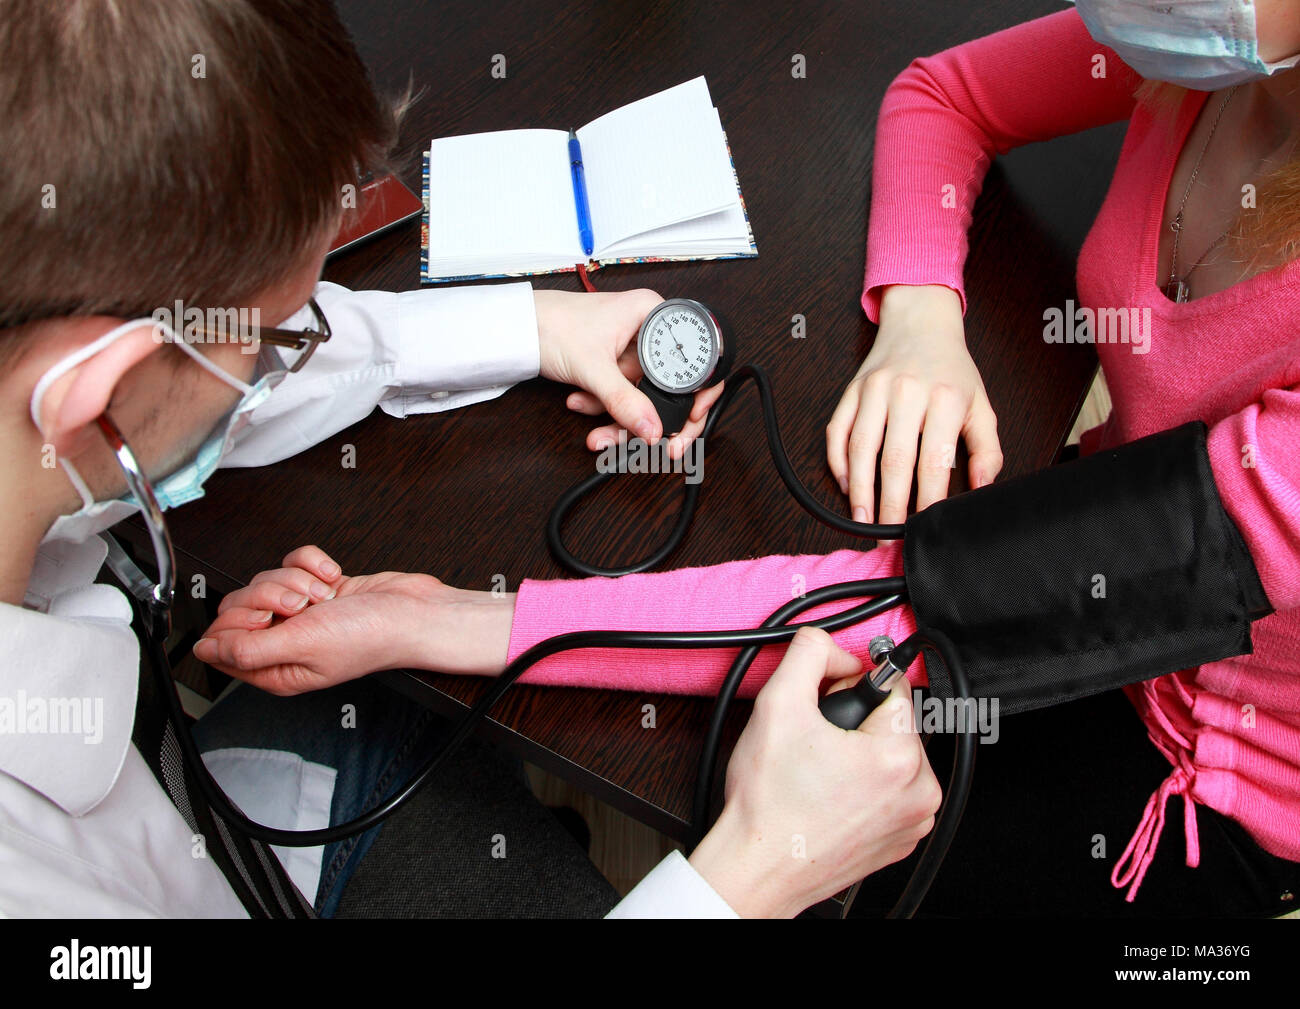 The doctor examines the readings on the sphygmomanometer when measuring the blood pressure. Stock Photo